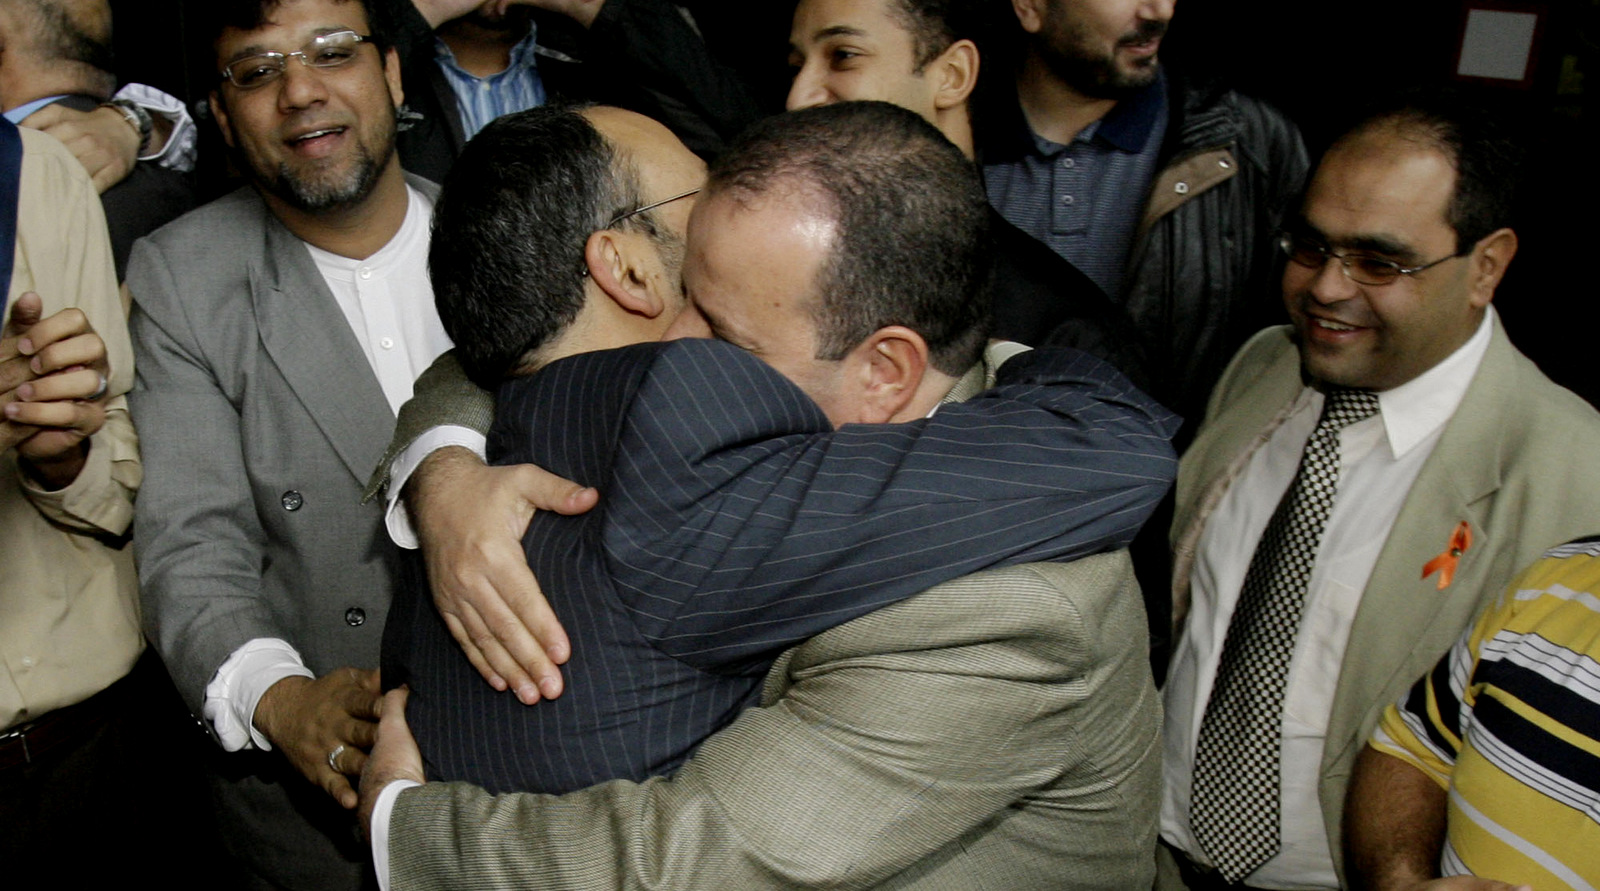 Defendants Shukri Abu Baker, center left, and Abdulrahman Odeh, hug after a mistrial was declared in the Holy Land Foundation trial at the federal courthouse, Oct. 22, 2007, in Dallas. (AP/Matt Slocum)